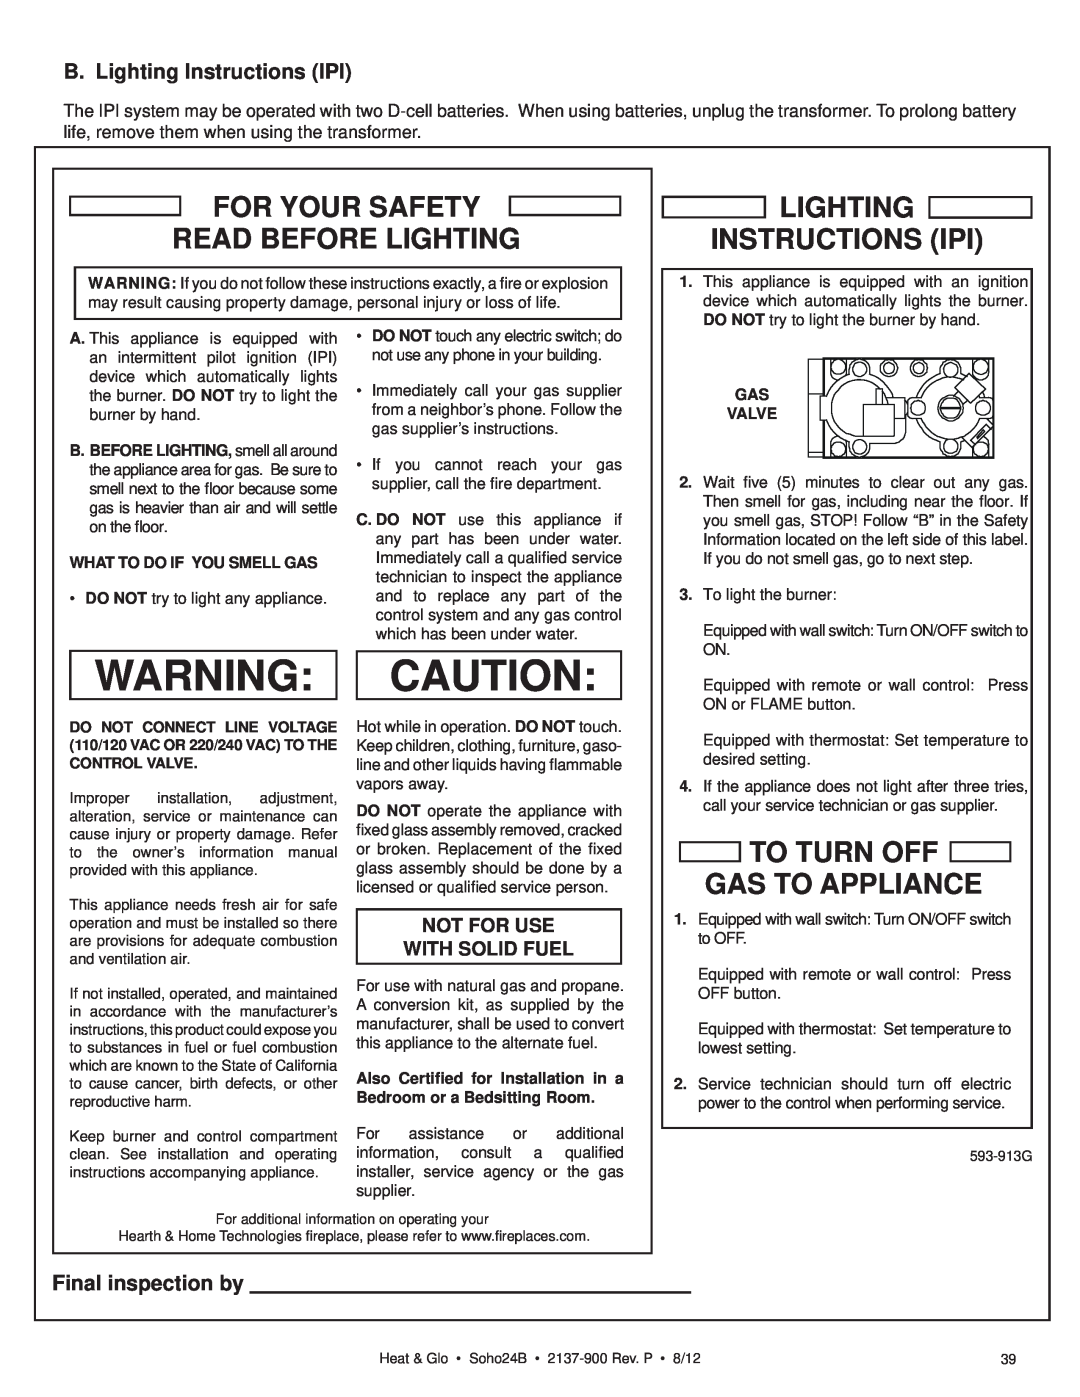 Heat & Glo LifeStyle 2137-900 owner manual B. Lighting Instructions IPI, Final inspection by, Warning Caution, Gas Valve 